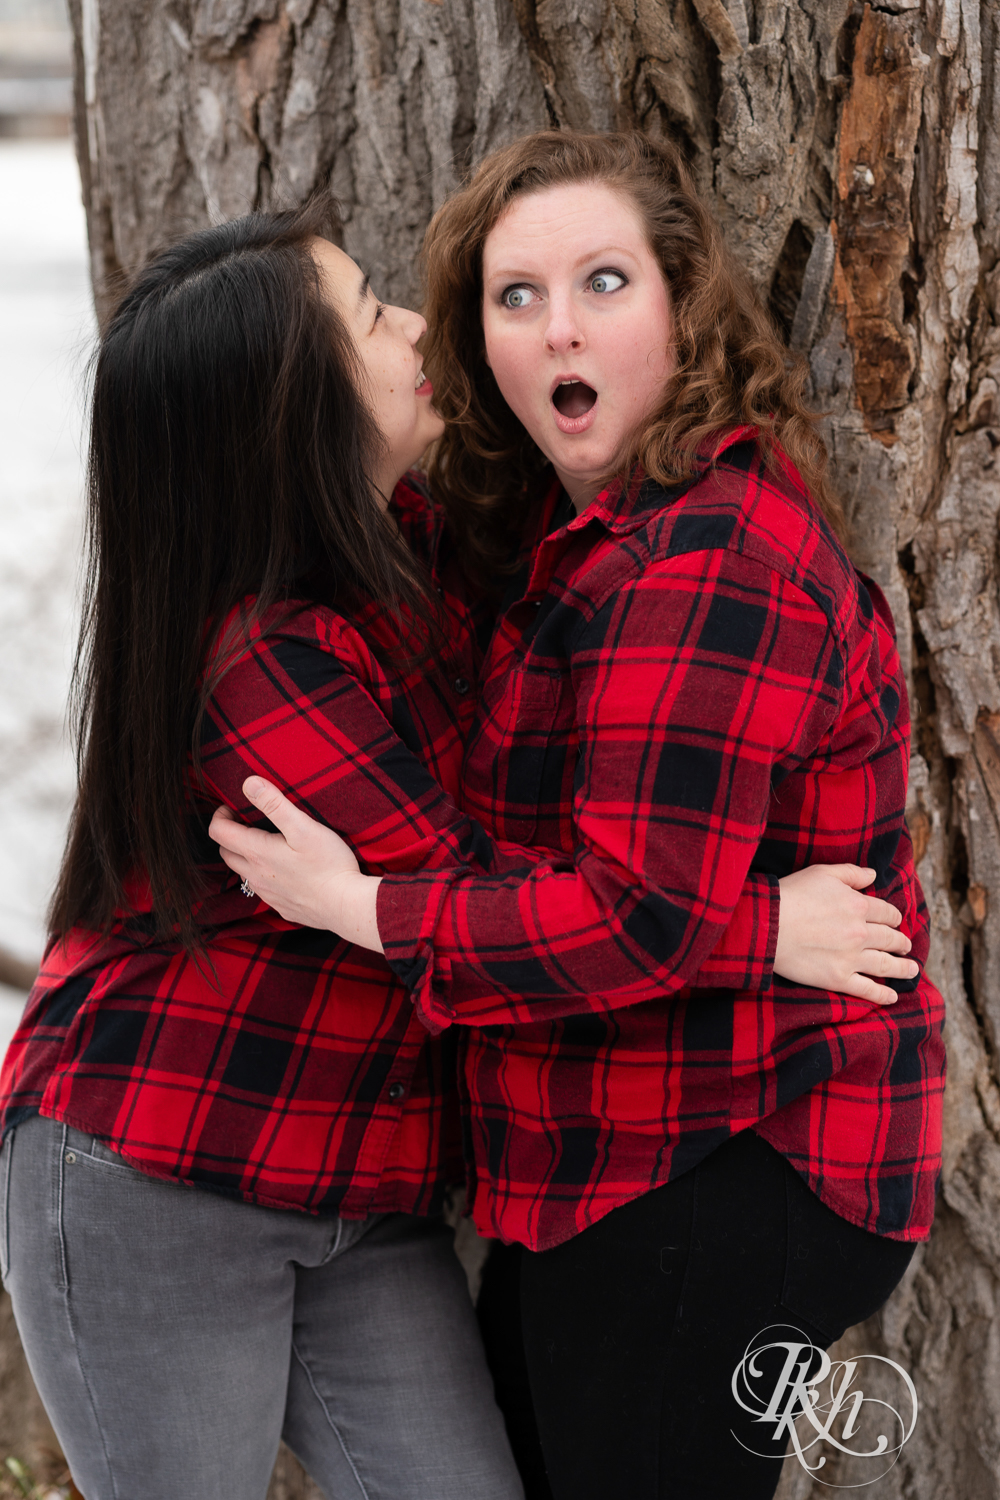 Red headed woman and Asian woman in red flannels laugh during winter engagement photography in Minneapolis, Minnesota.